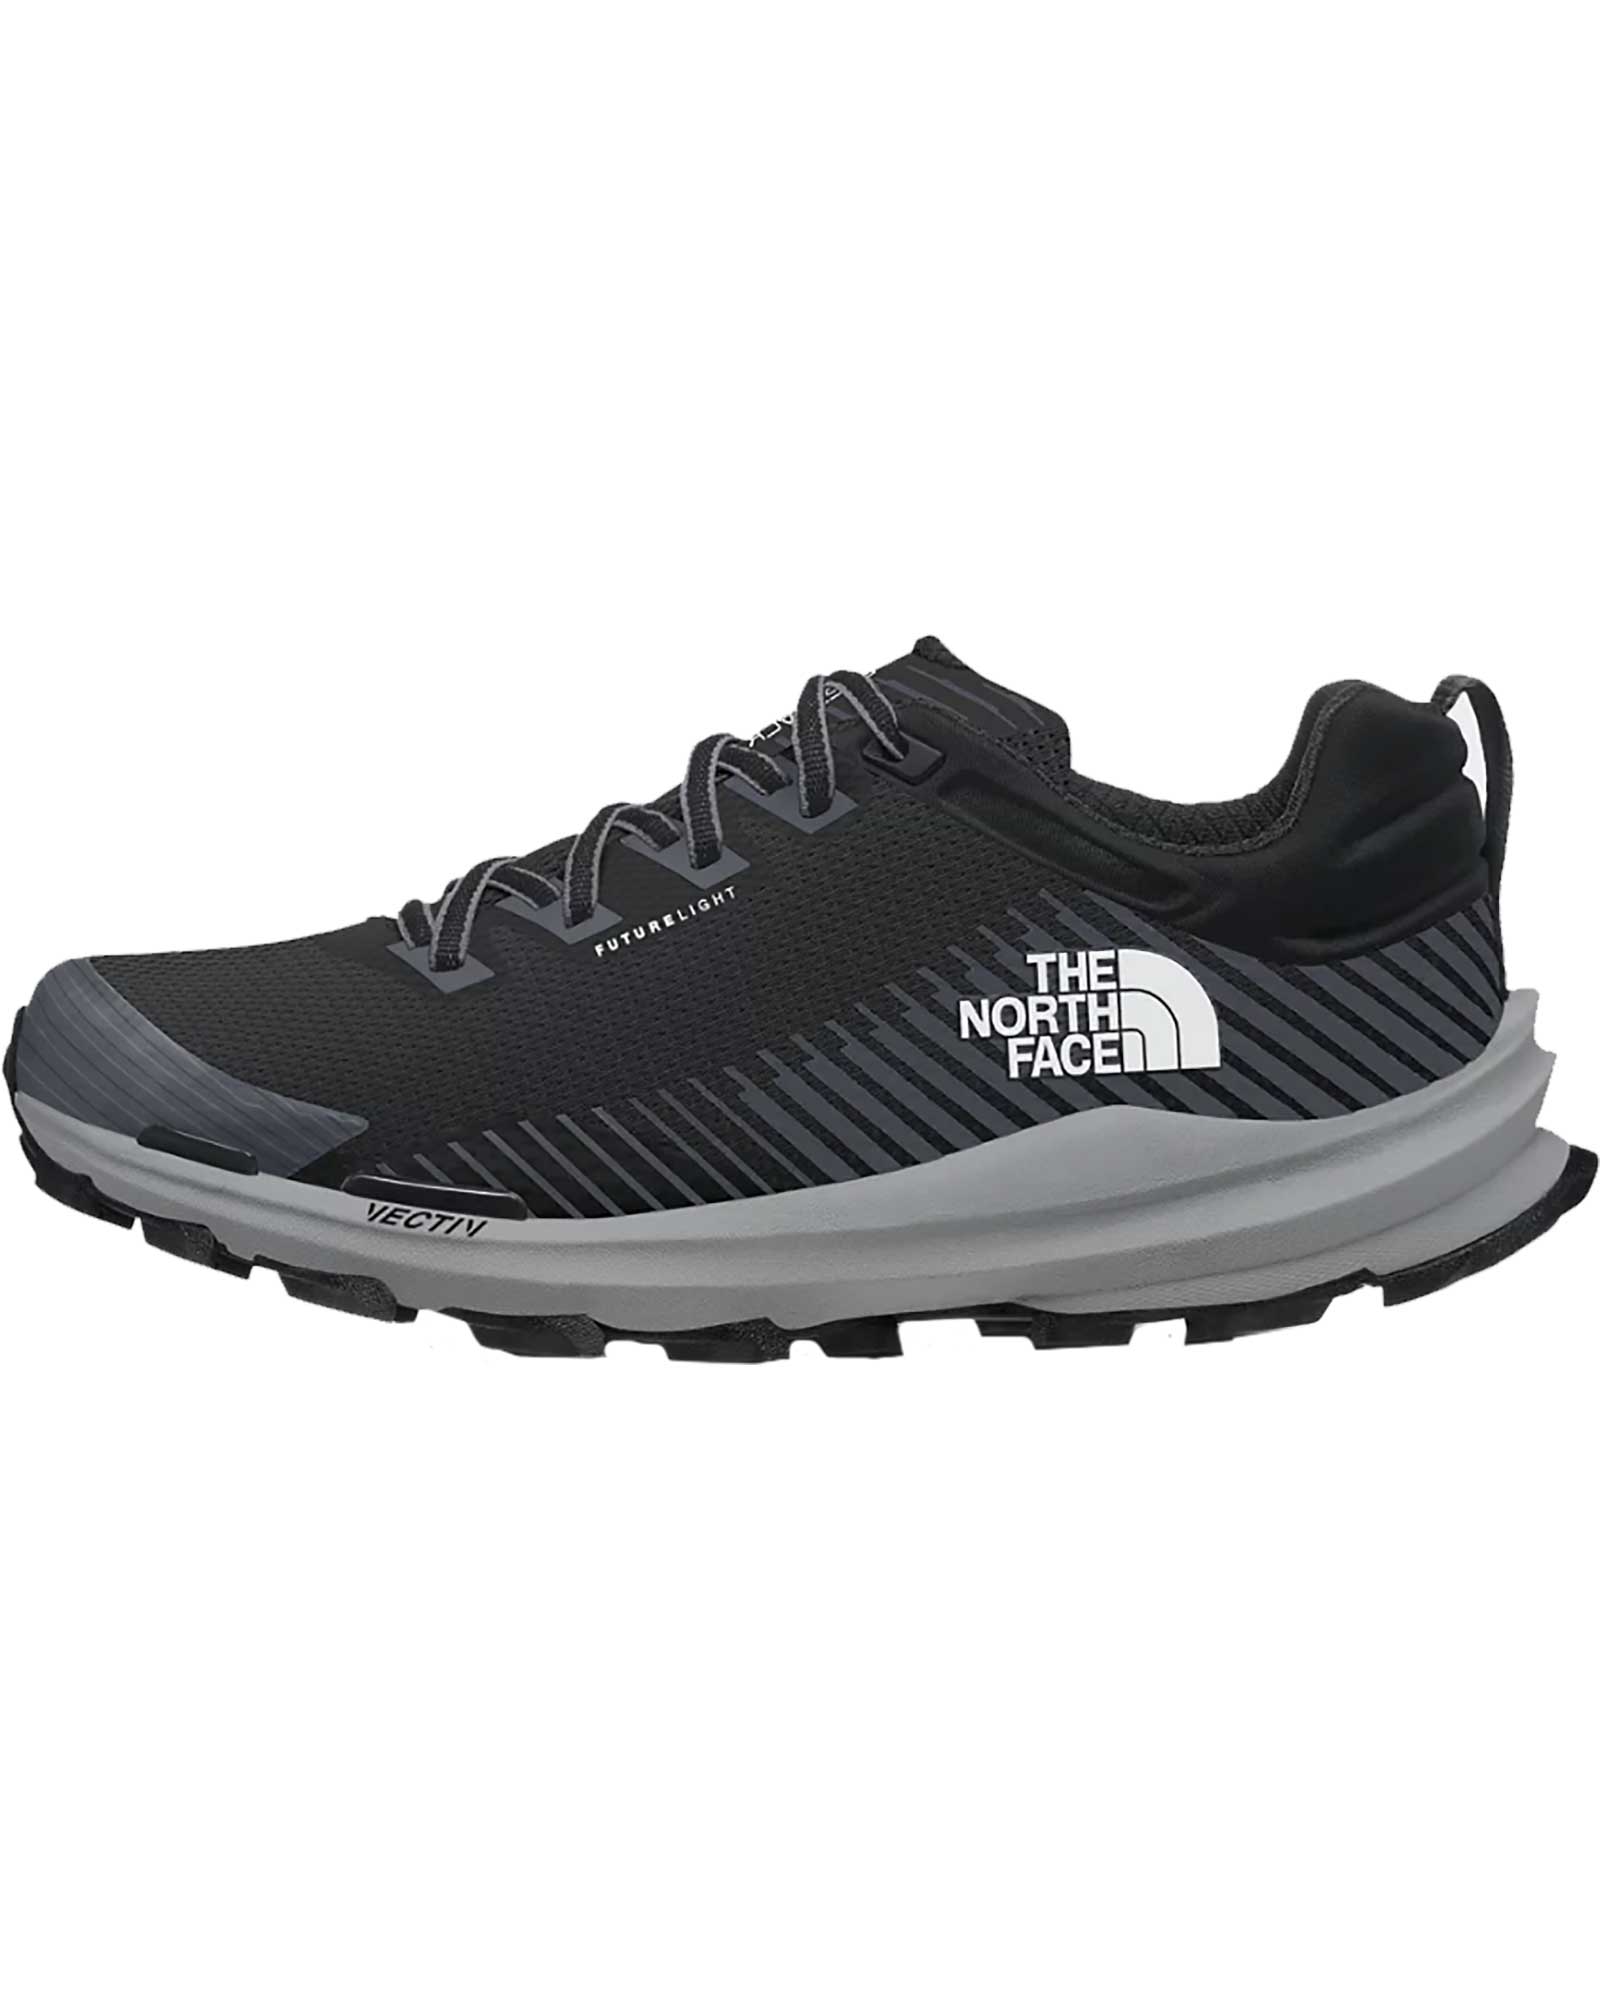 The North Face Men's Vectiv Fastpack FUTURELIGHT Shoes